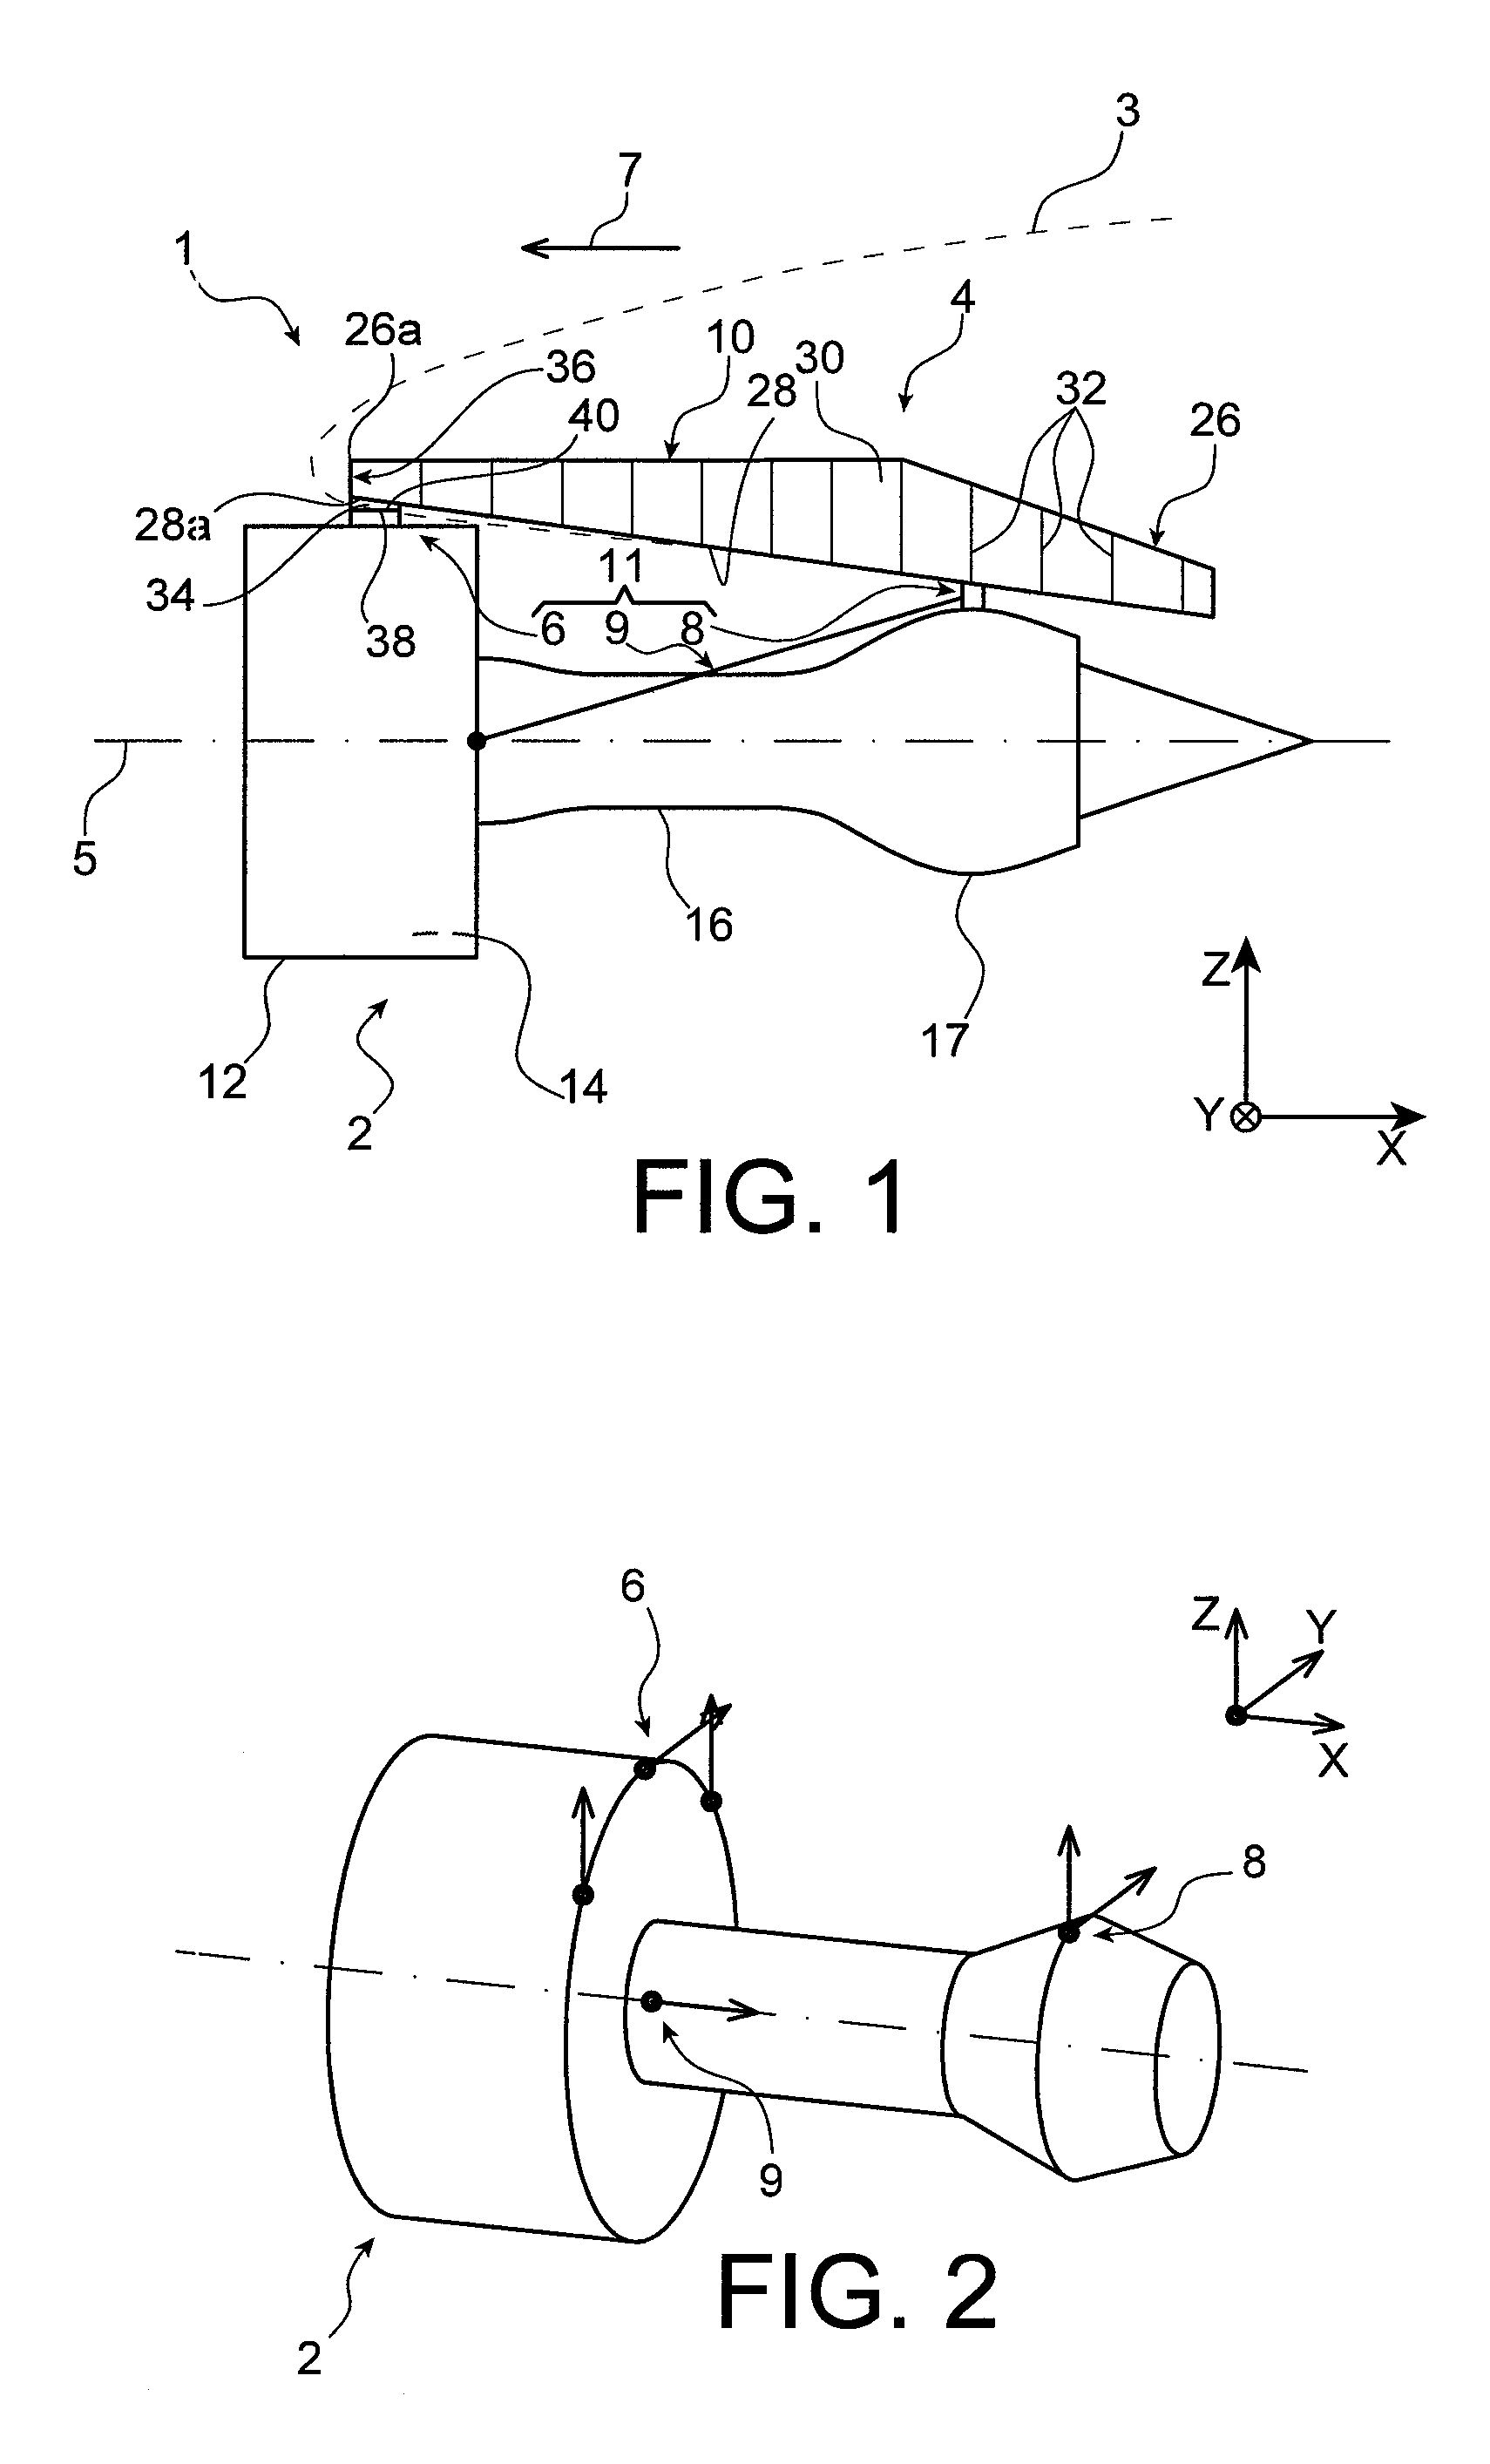 Aircraft engine mounting pylon comprising a tapered shim to secure the forward engine attachment